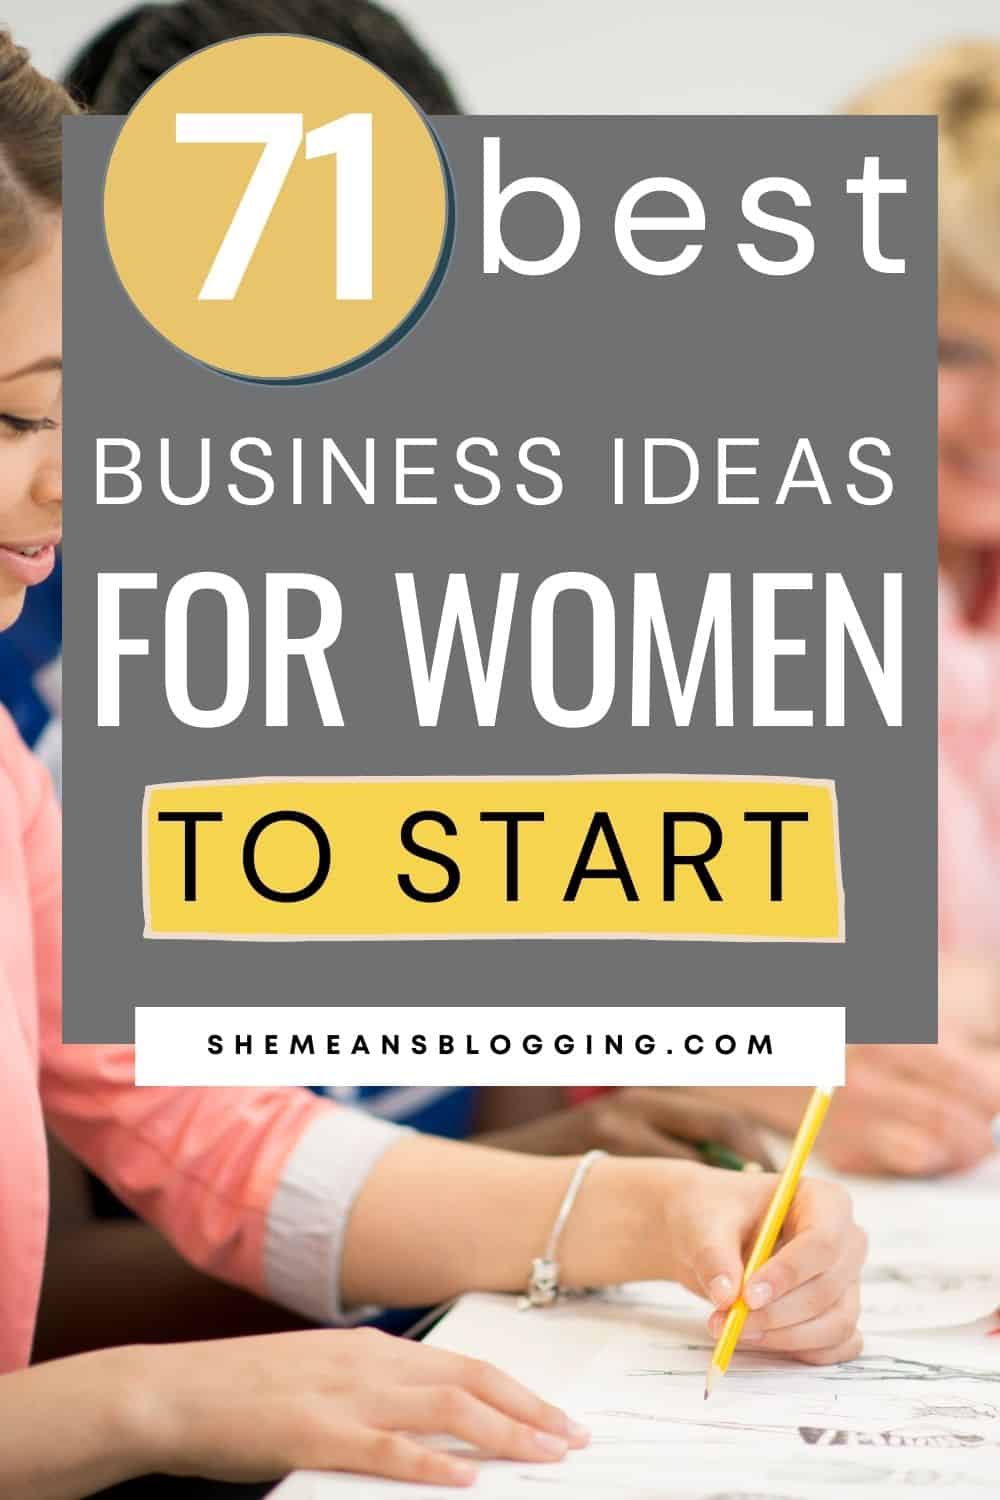 71 Best business ideas for women to make money online. List of top ideas for women sitting at home. Click for Online business ideas for women at home. Work from home business ideas for ladies. business ideas for ladies sitting at home, online business ideas for women. work at home business ideas